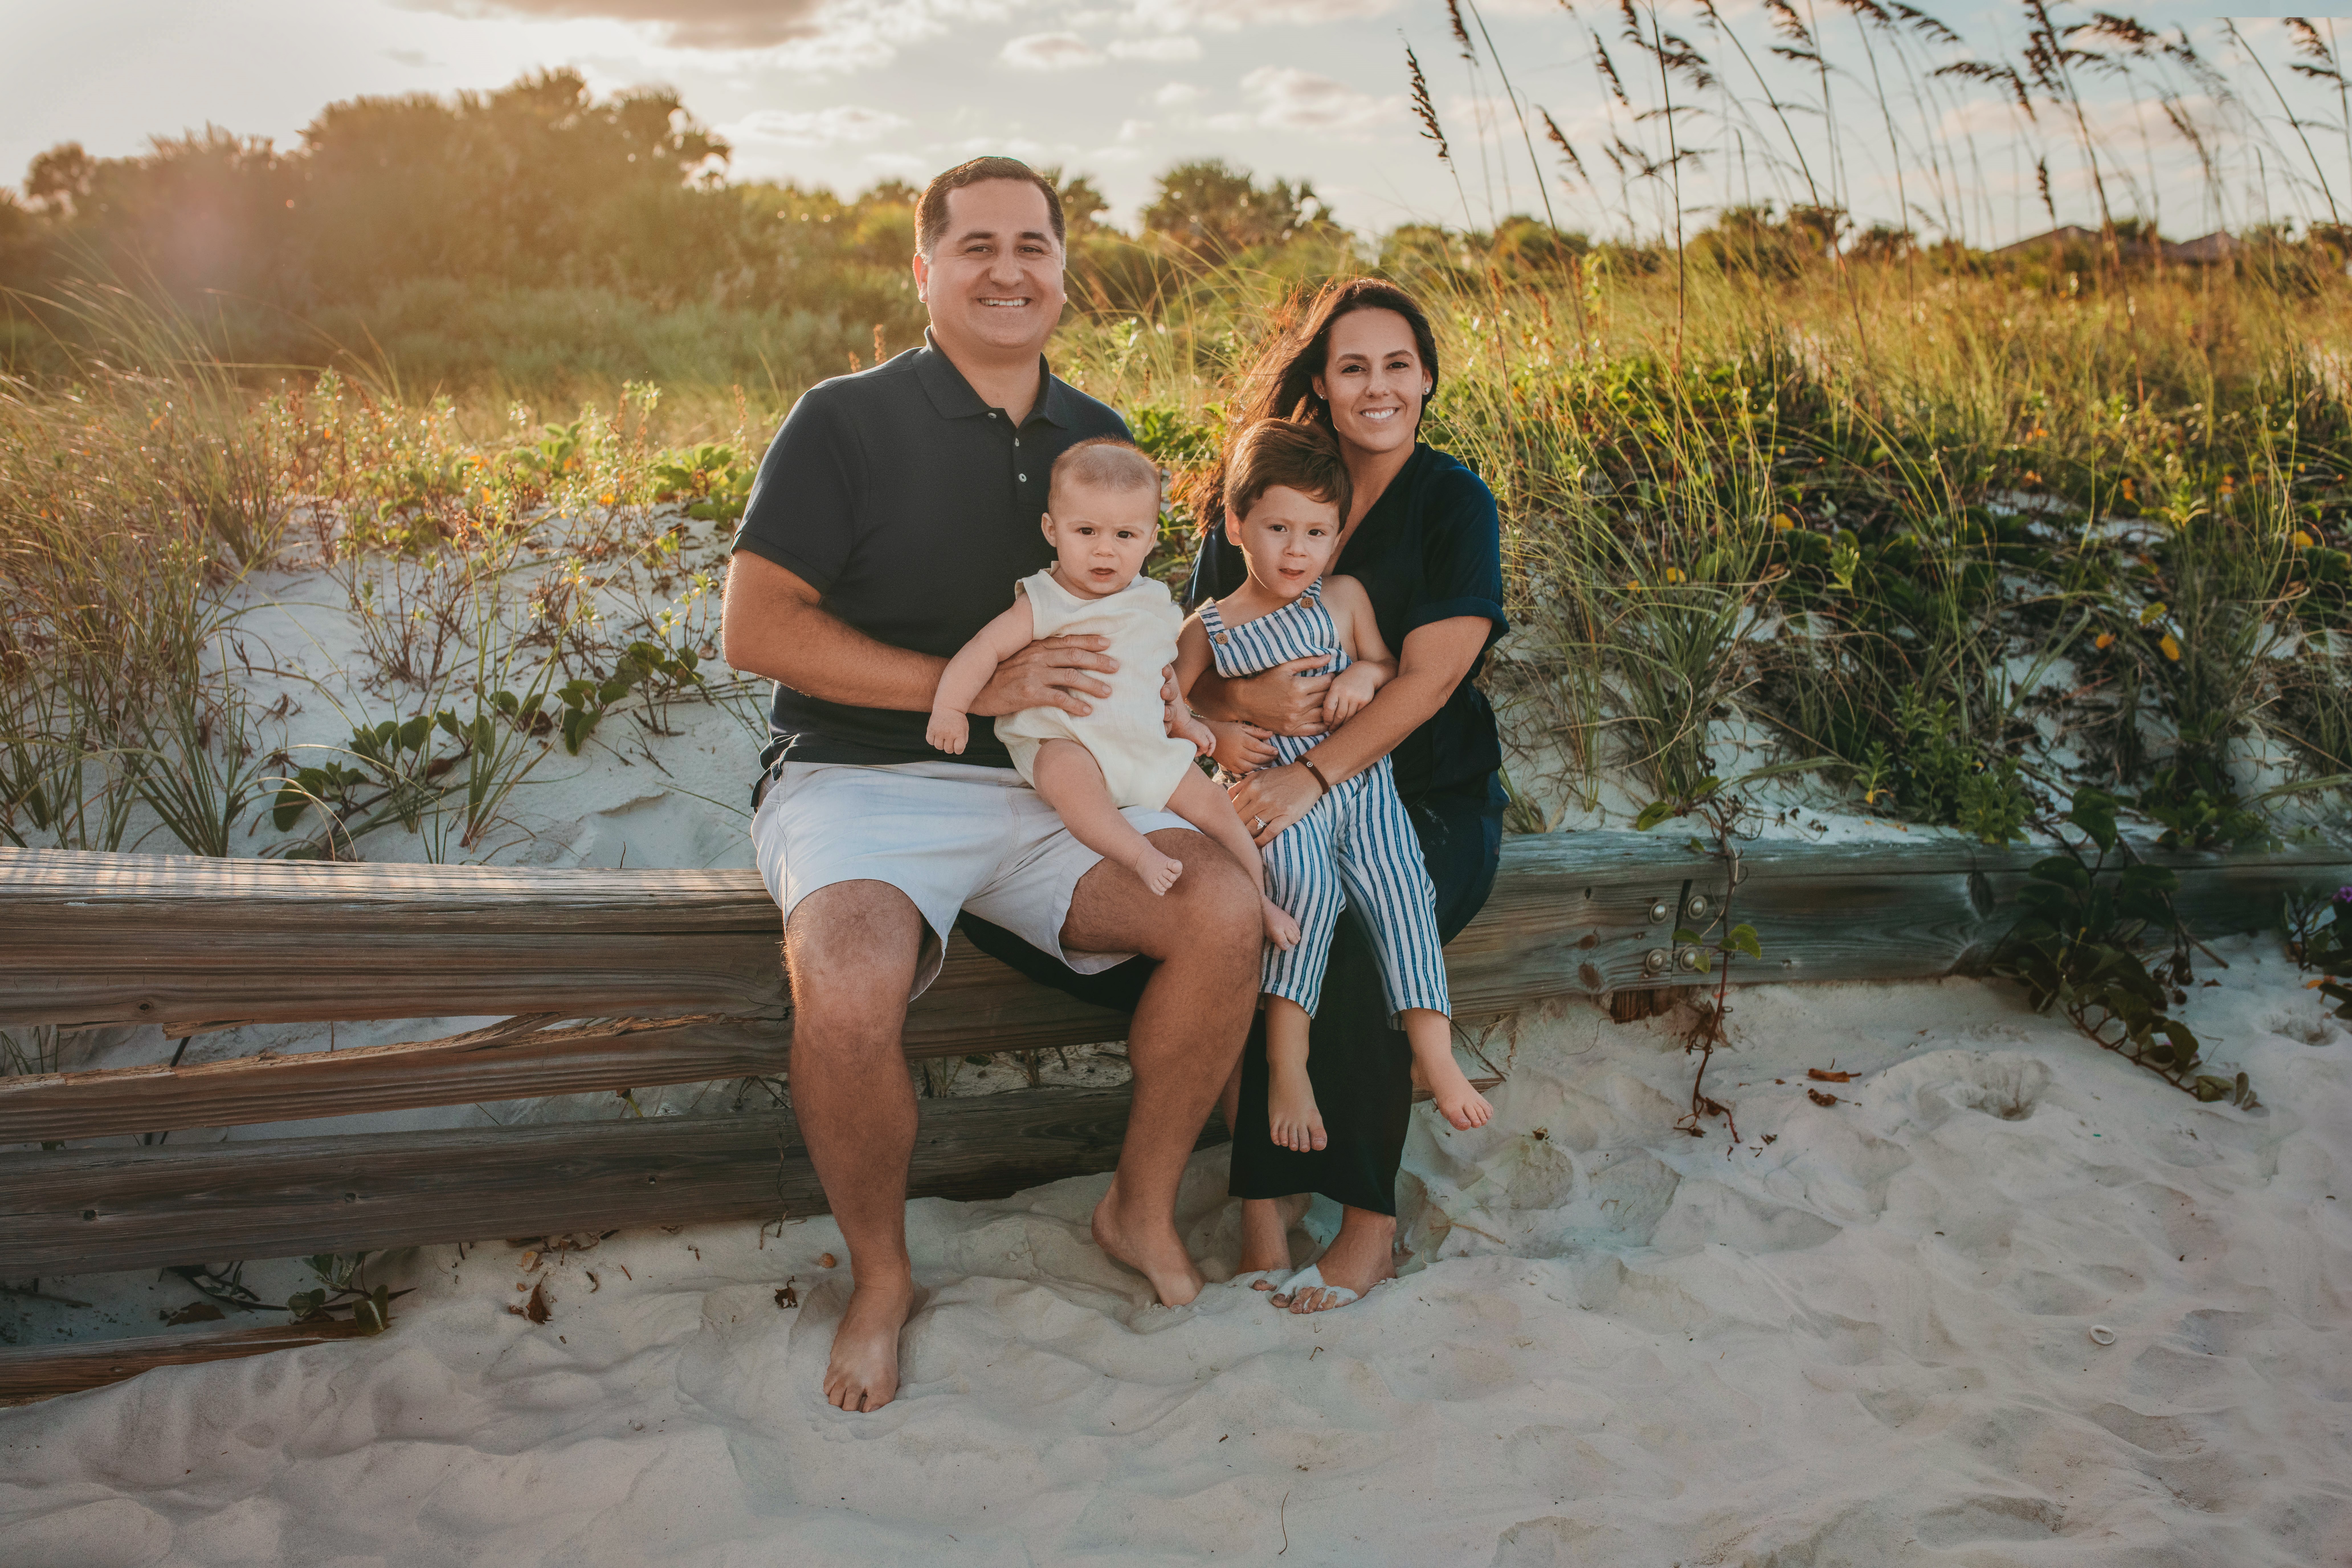 Attorney Justin Saar and his wife, Sara, enjoy a trip to Cocoa Beach, Fla., with their two sons, Preston, 2, and Henry, 4.